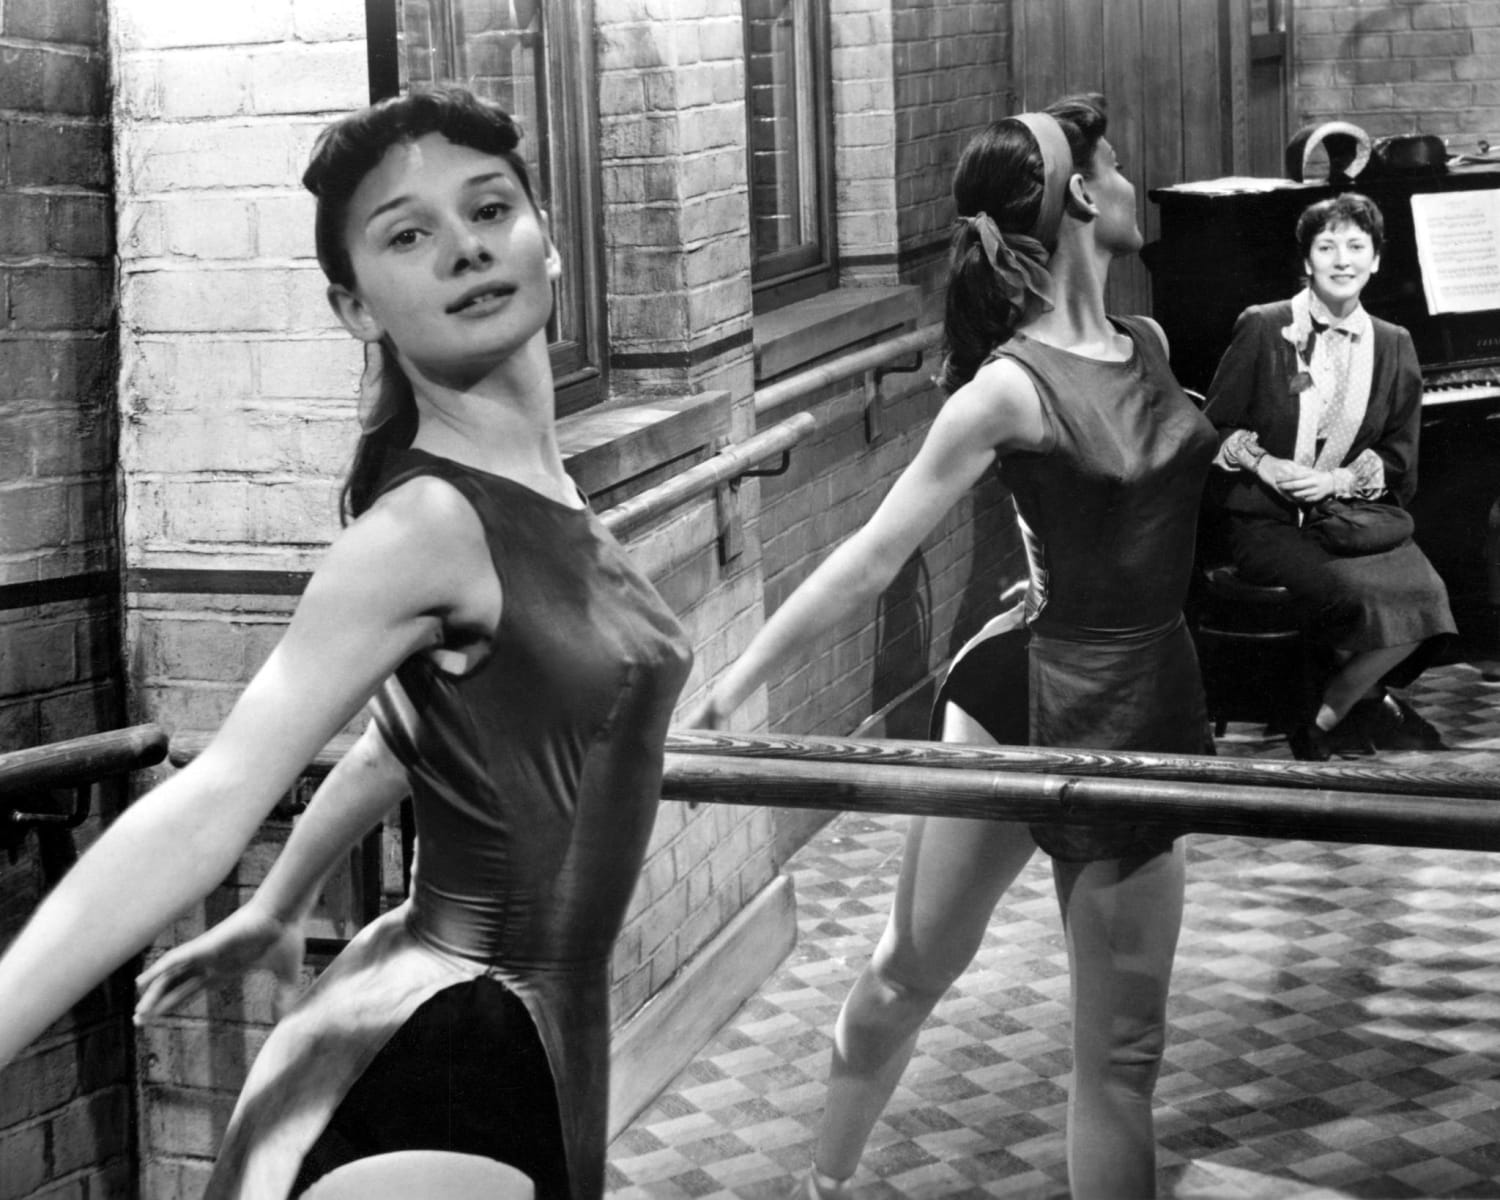 Early 1940's: Young Audrey Hepburn in dancing class, living in the German-occupied Netherlands during WWII.